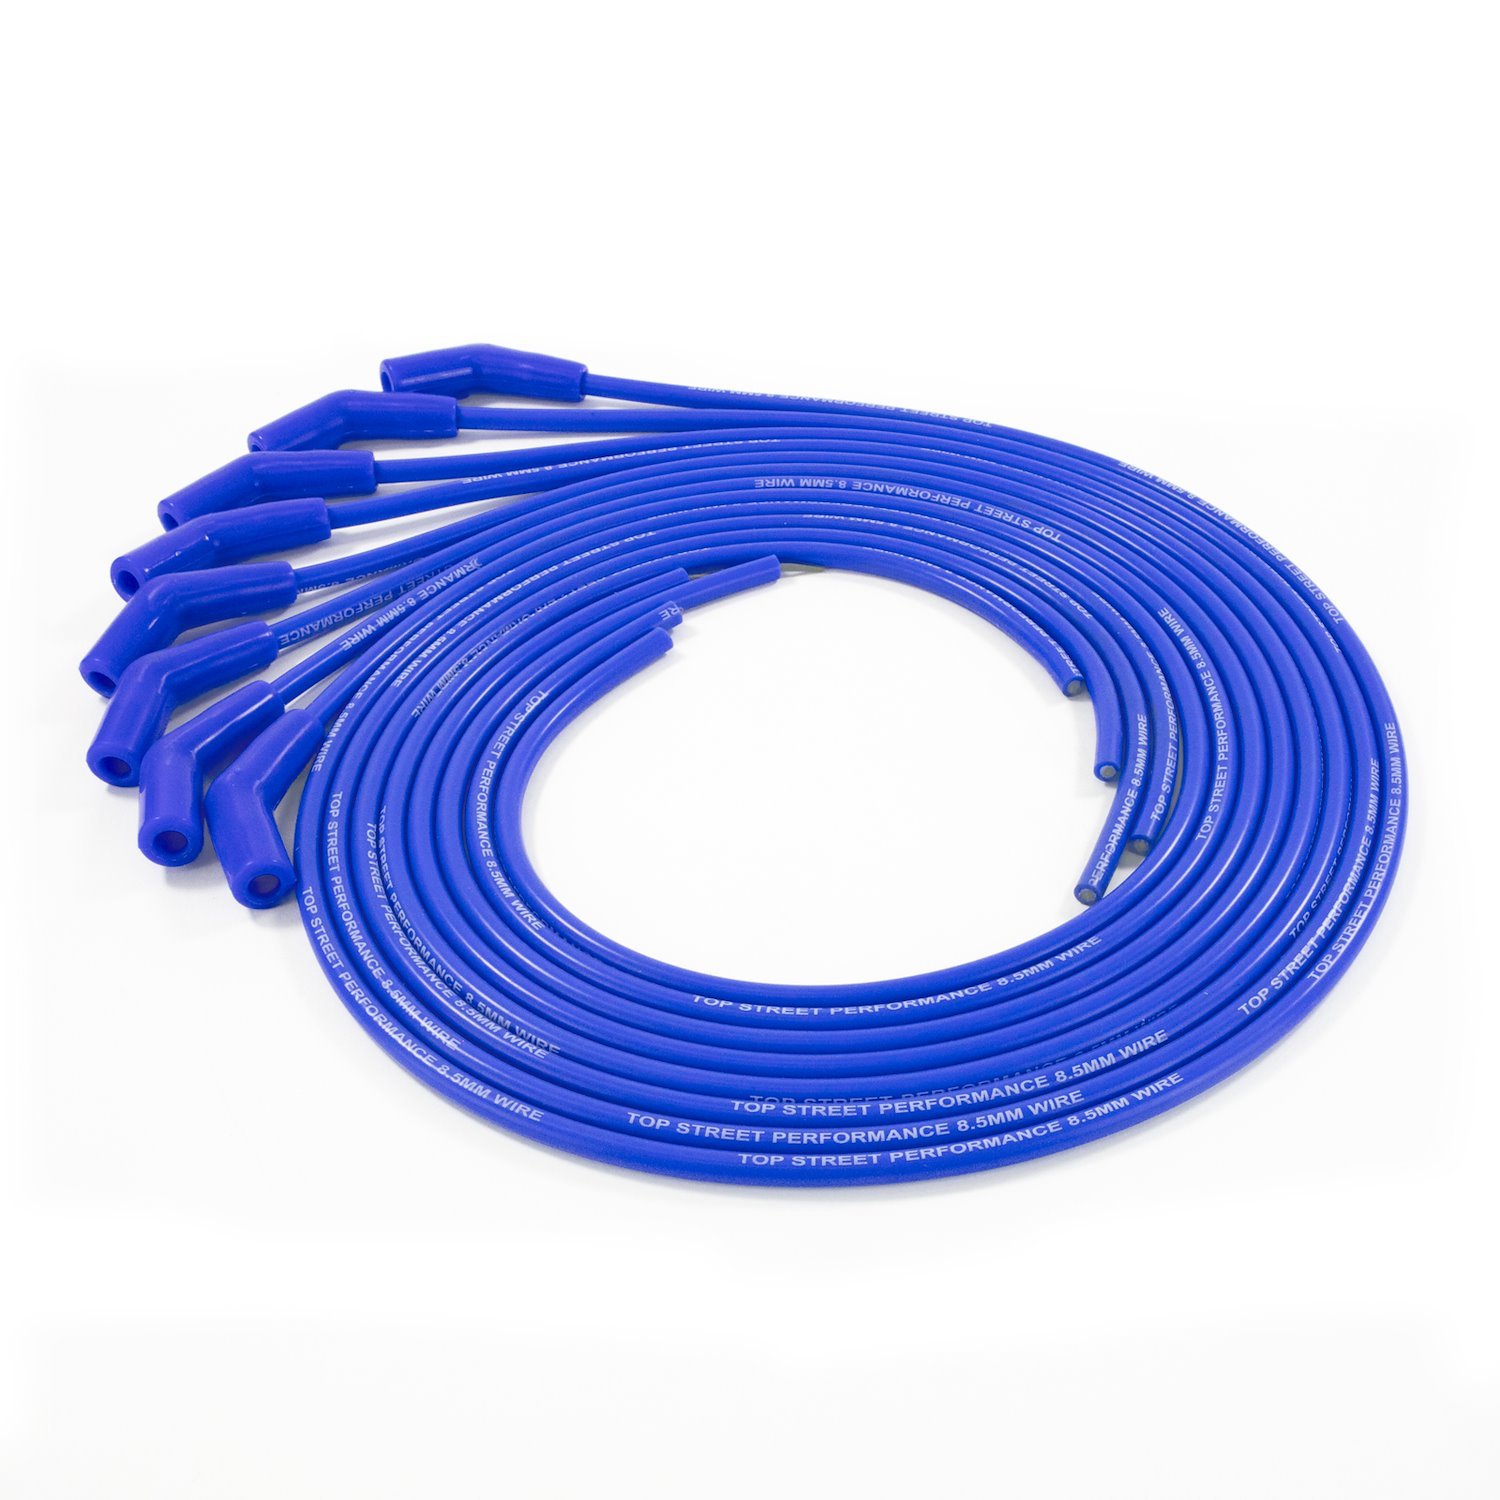 85635 Universal Ignition Wires, 8.5mm Blue, 135 Deg. Plug Boots